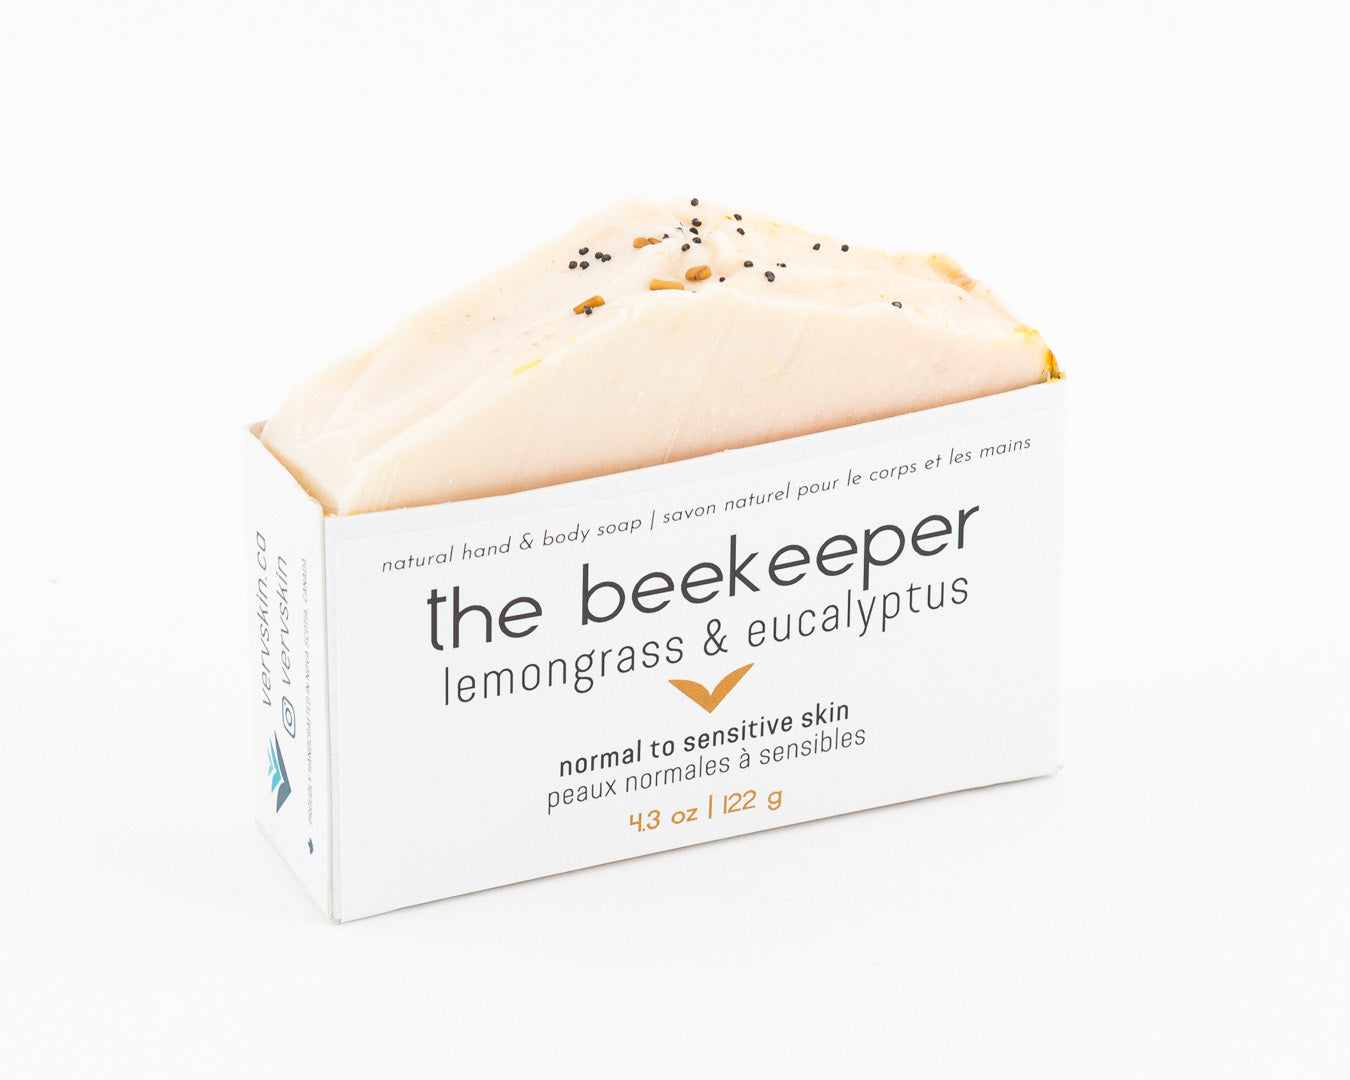 The Beekeeper Soap in paper packaging. Lemongrass and eucalyptus scented natural hand and body soap for normal to sensitive skin. 4.3oz / 122g